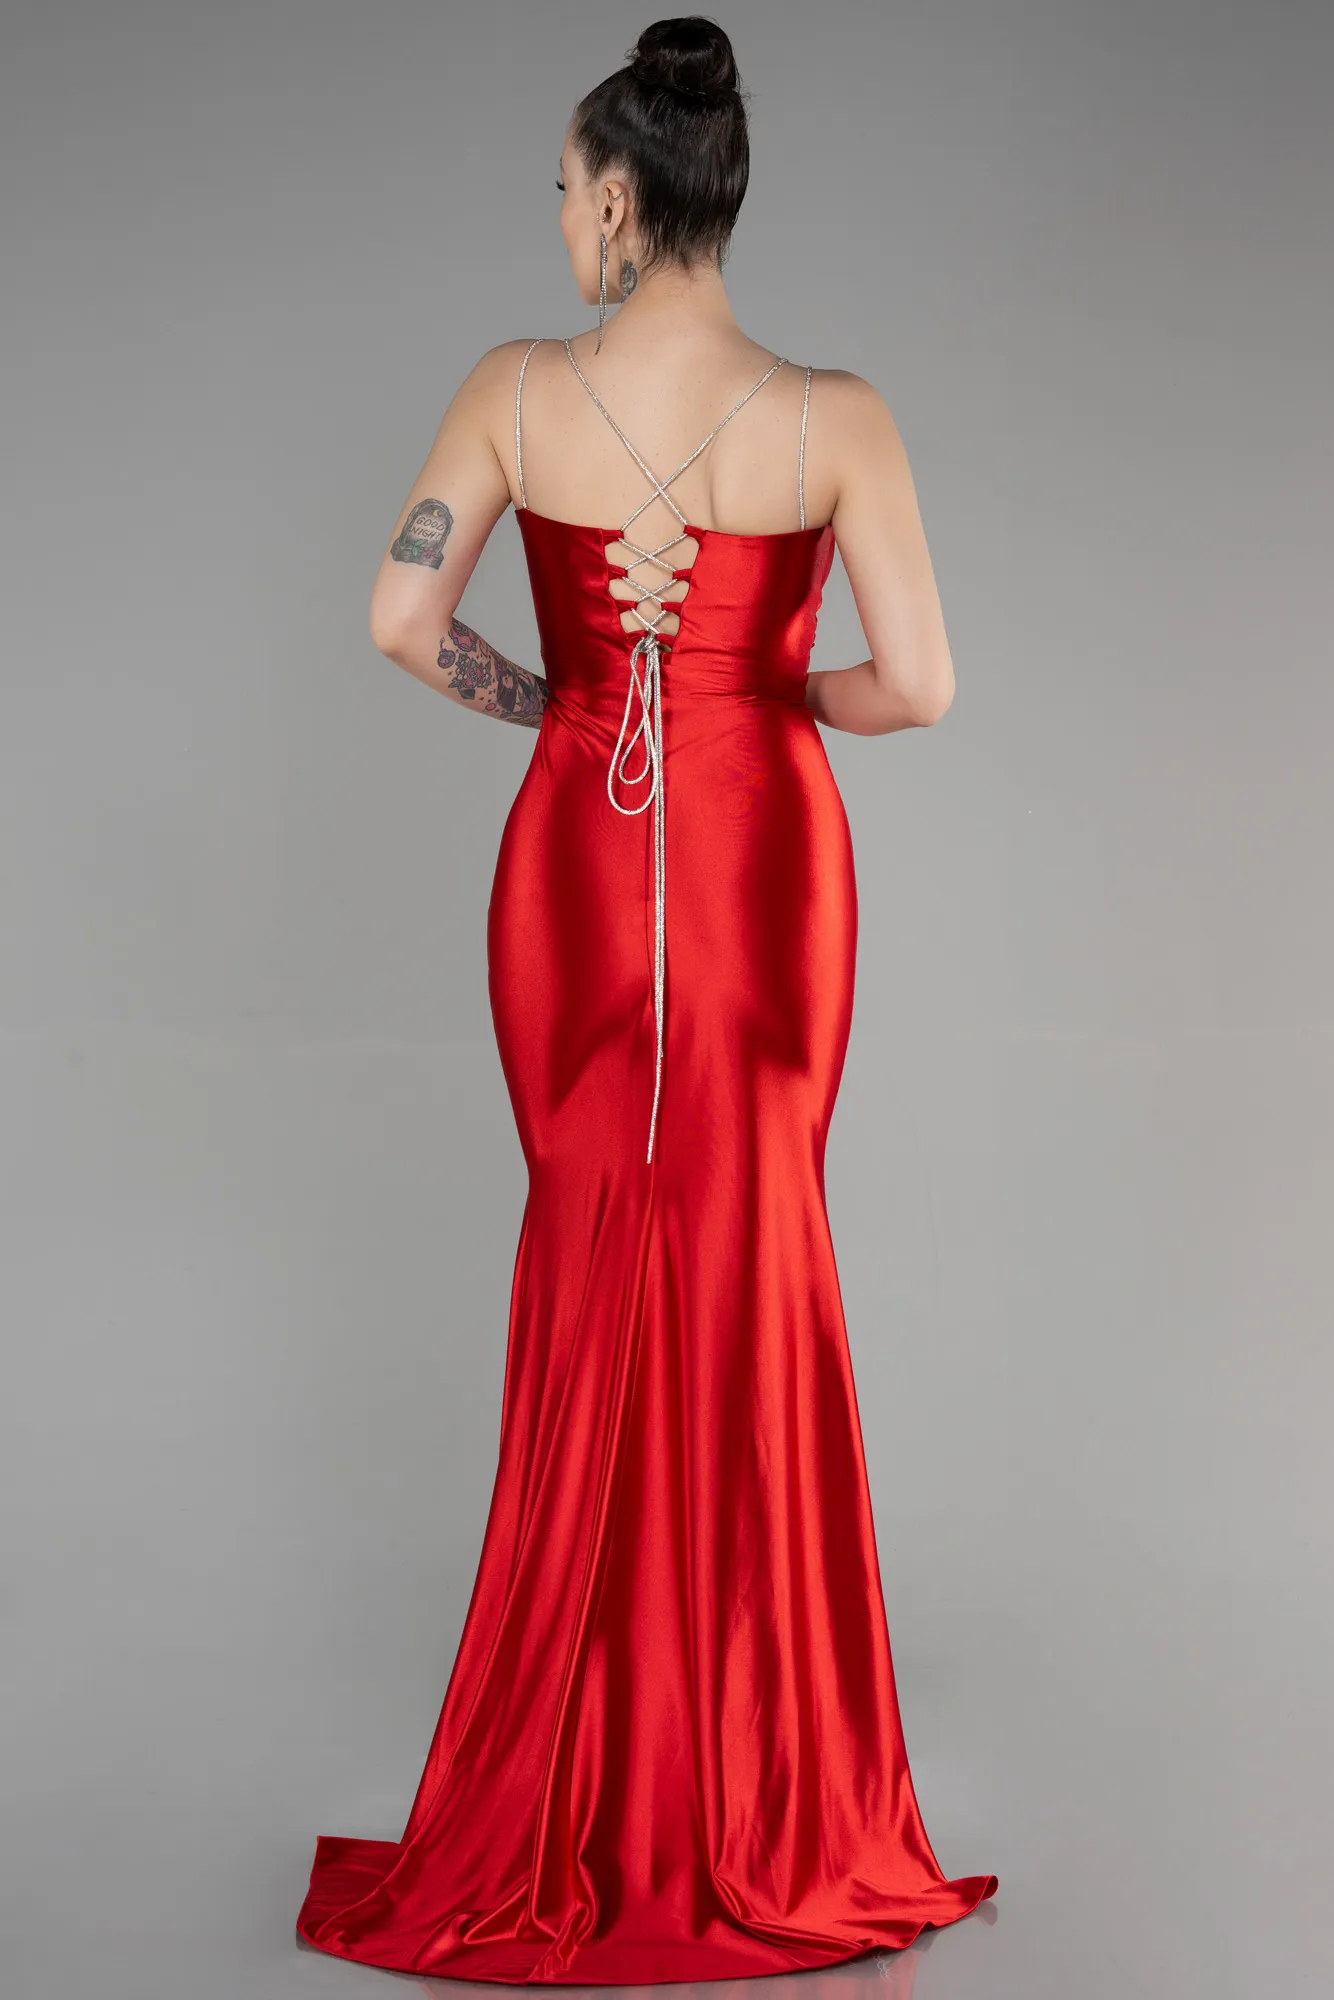 Red-Long Mermaid Evening Gown ABU3575